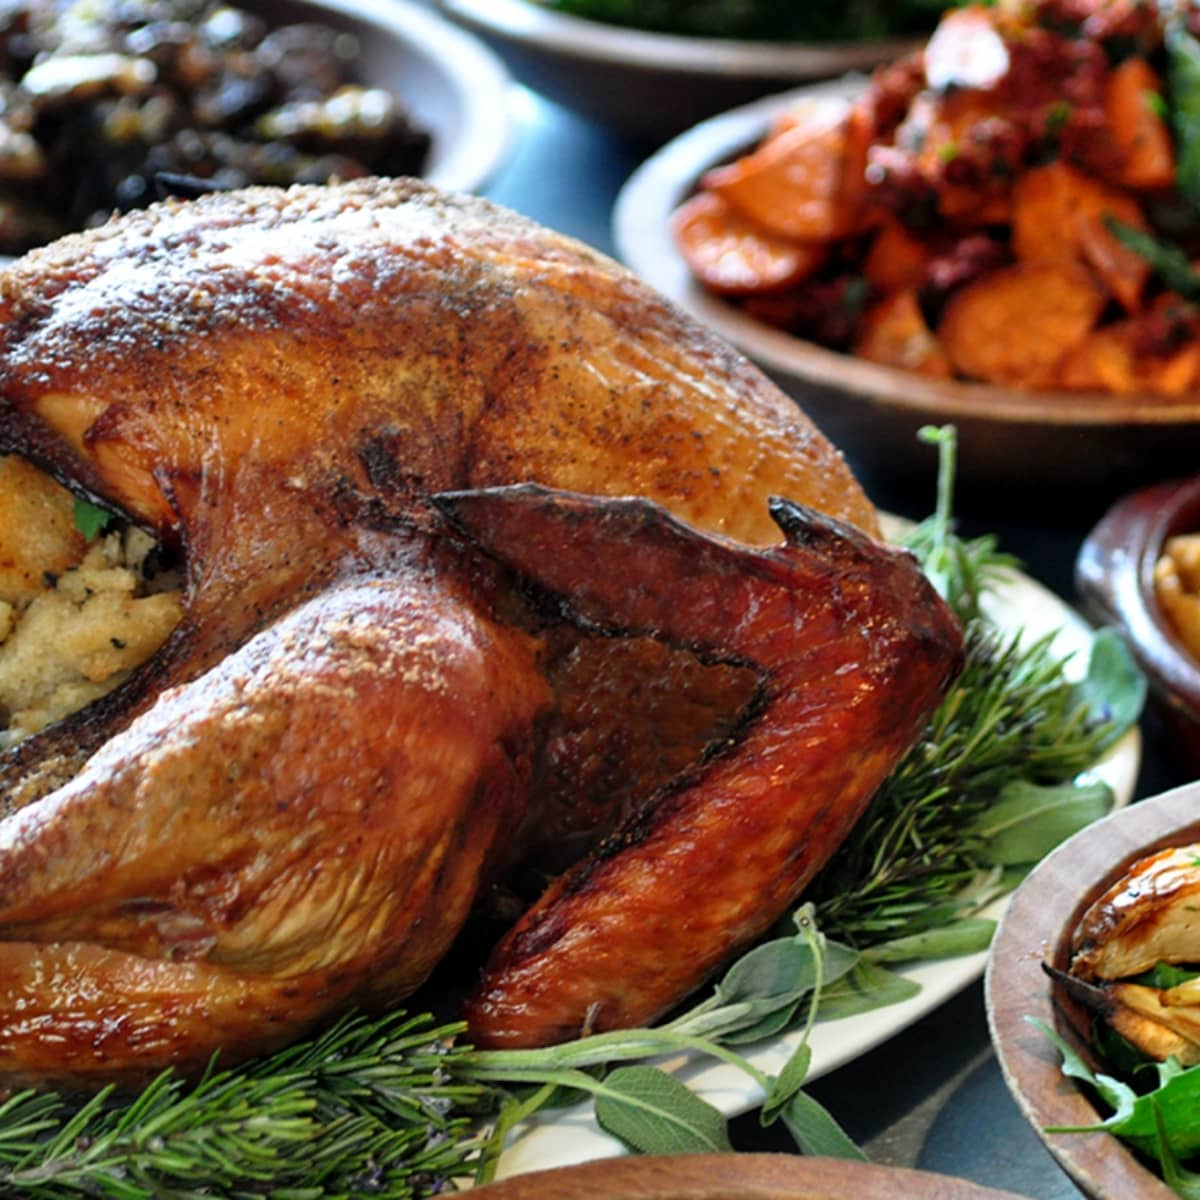 How to Do the Thanksgiving Holiday Right in Las Vegas